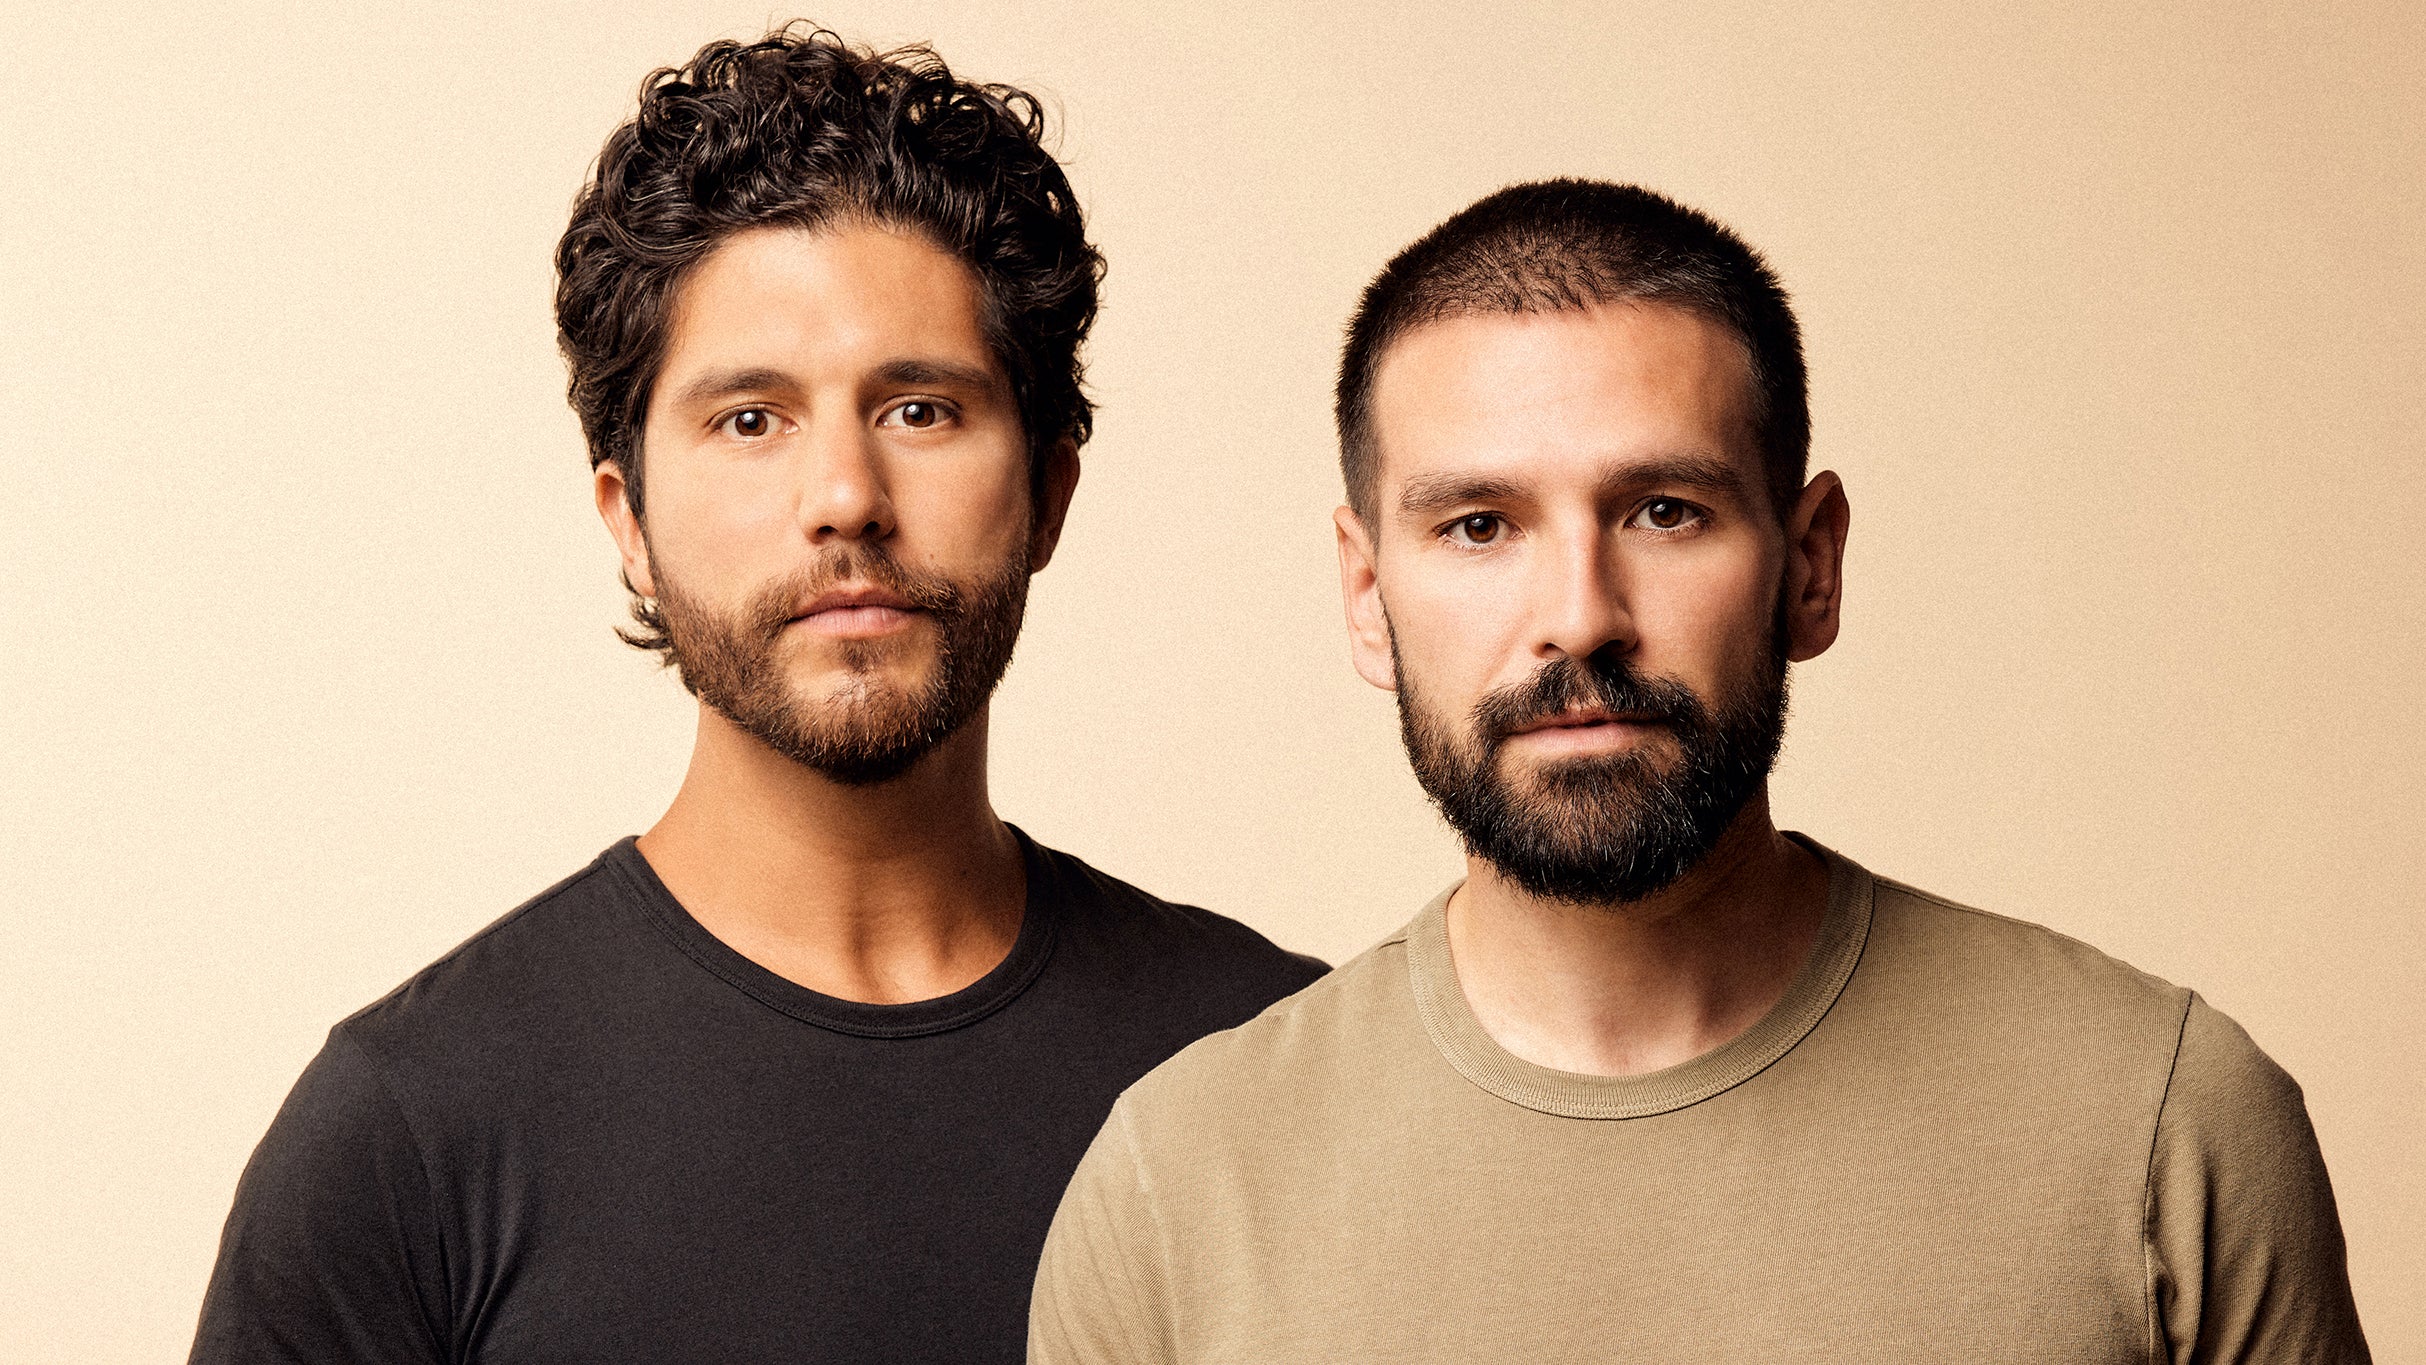 Dan + Shay: Heartbreak On The Map Tour presale password for early tickets in West Palm Beach